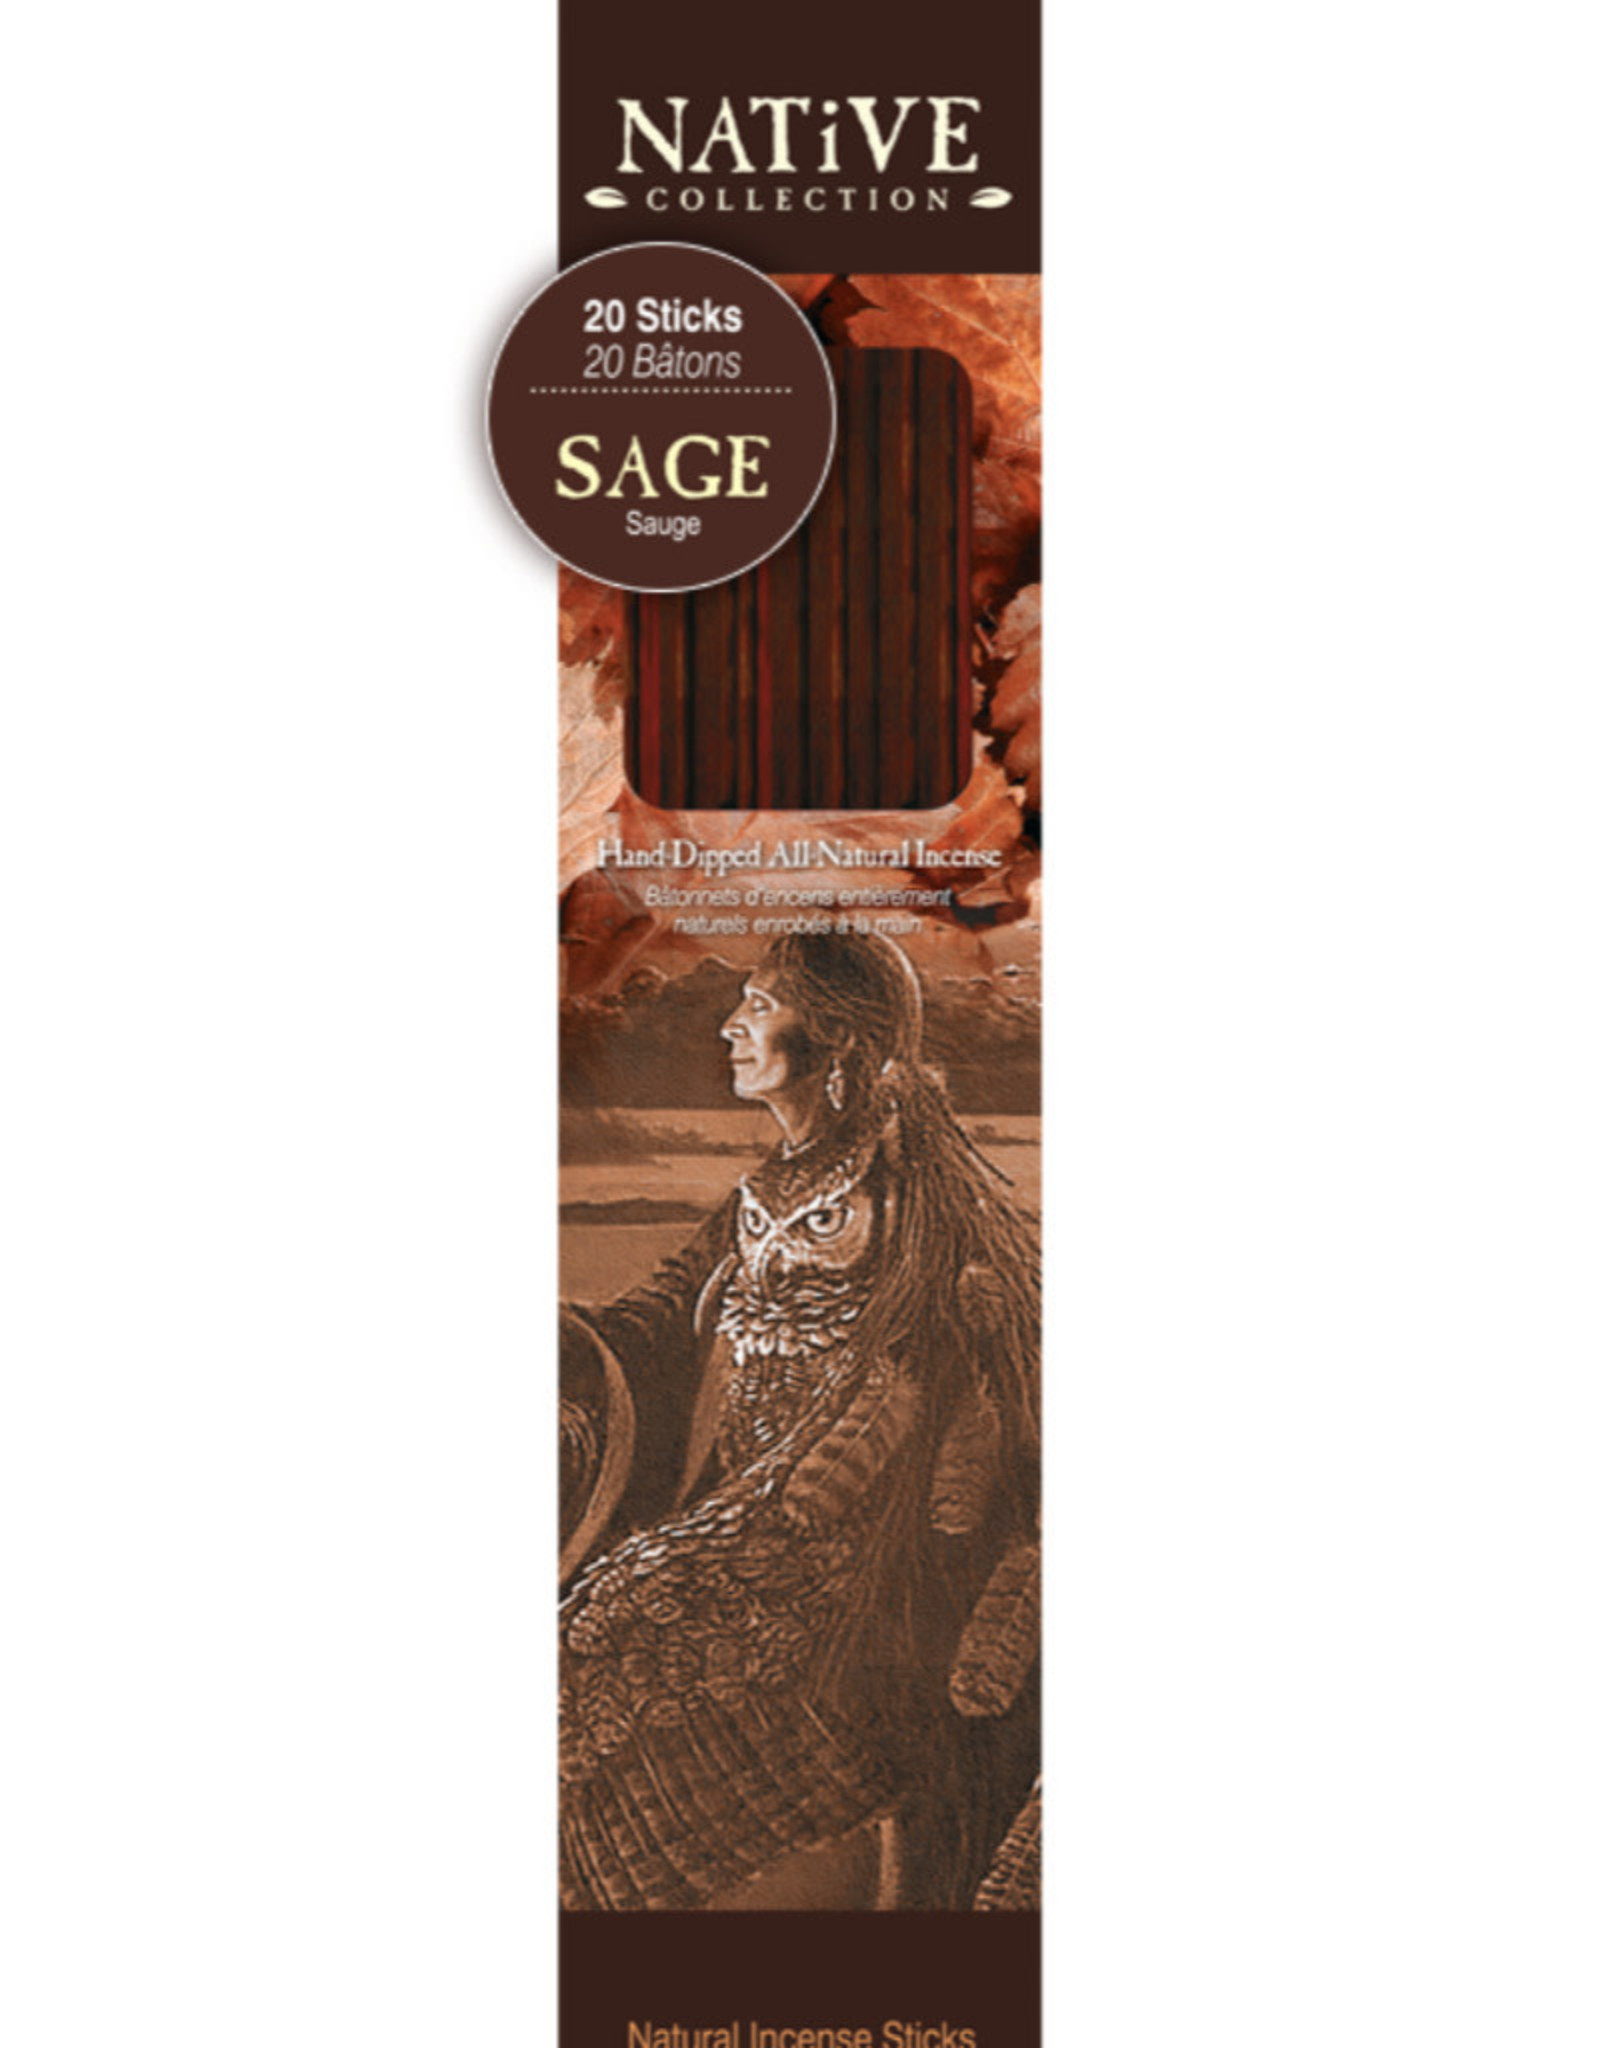 Native Collection Sage Native Collection Incense Sticks